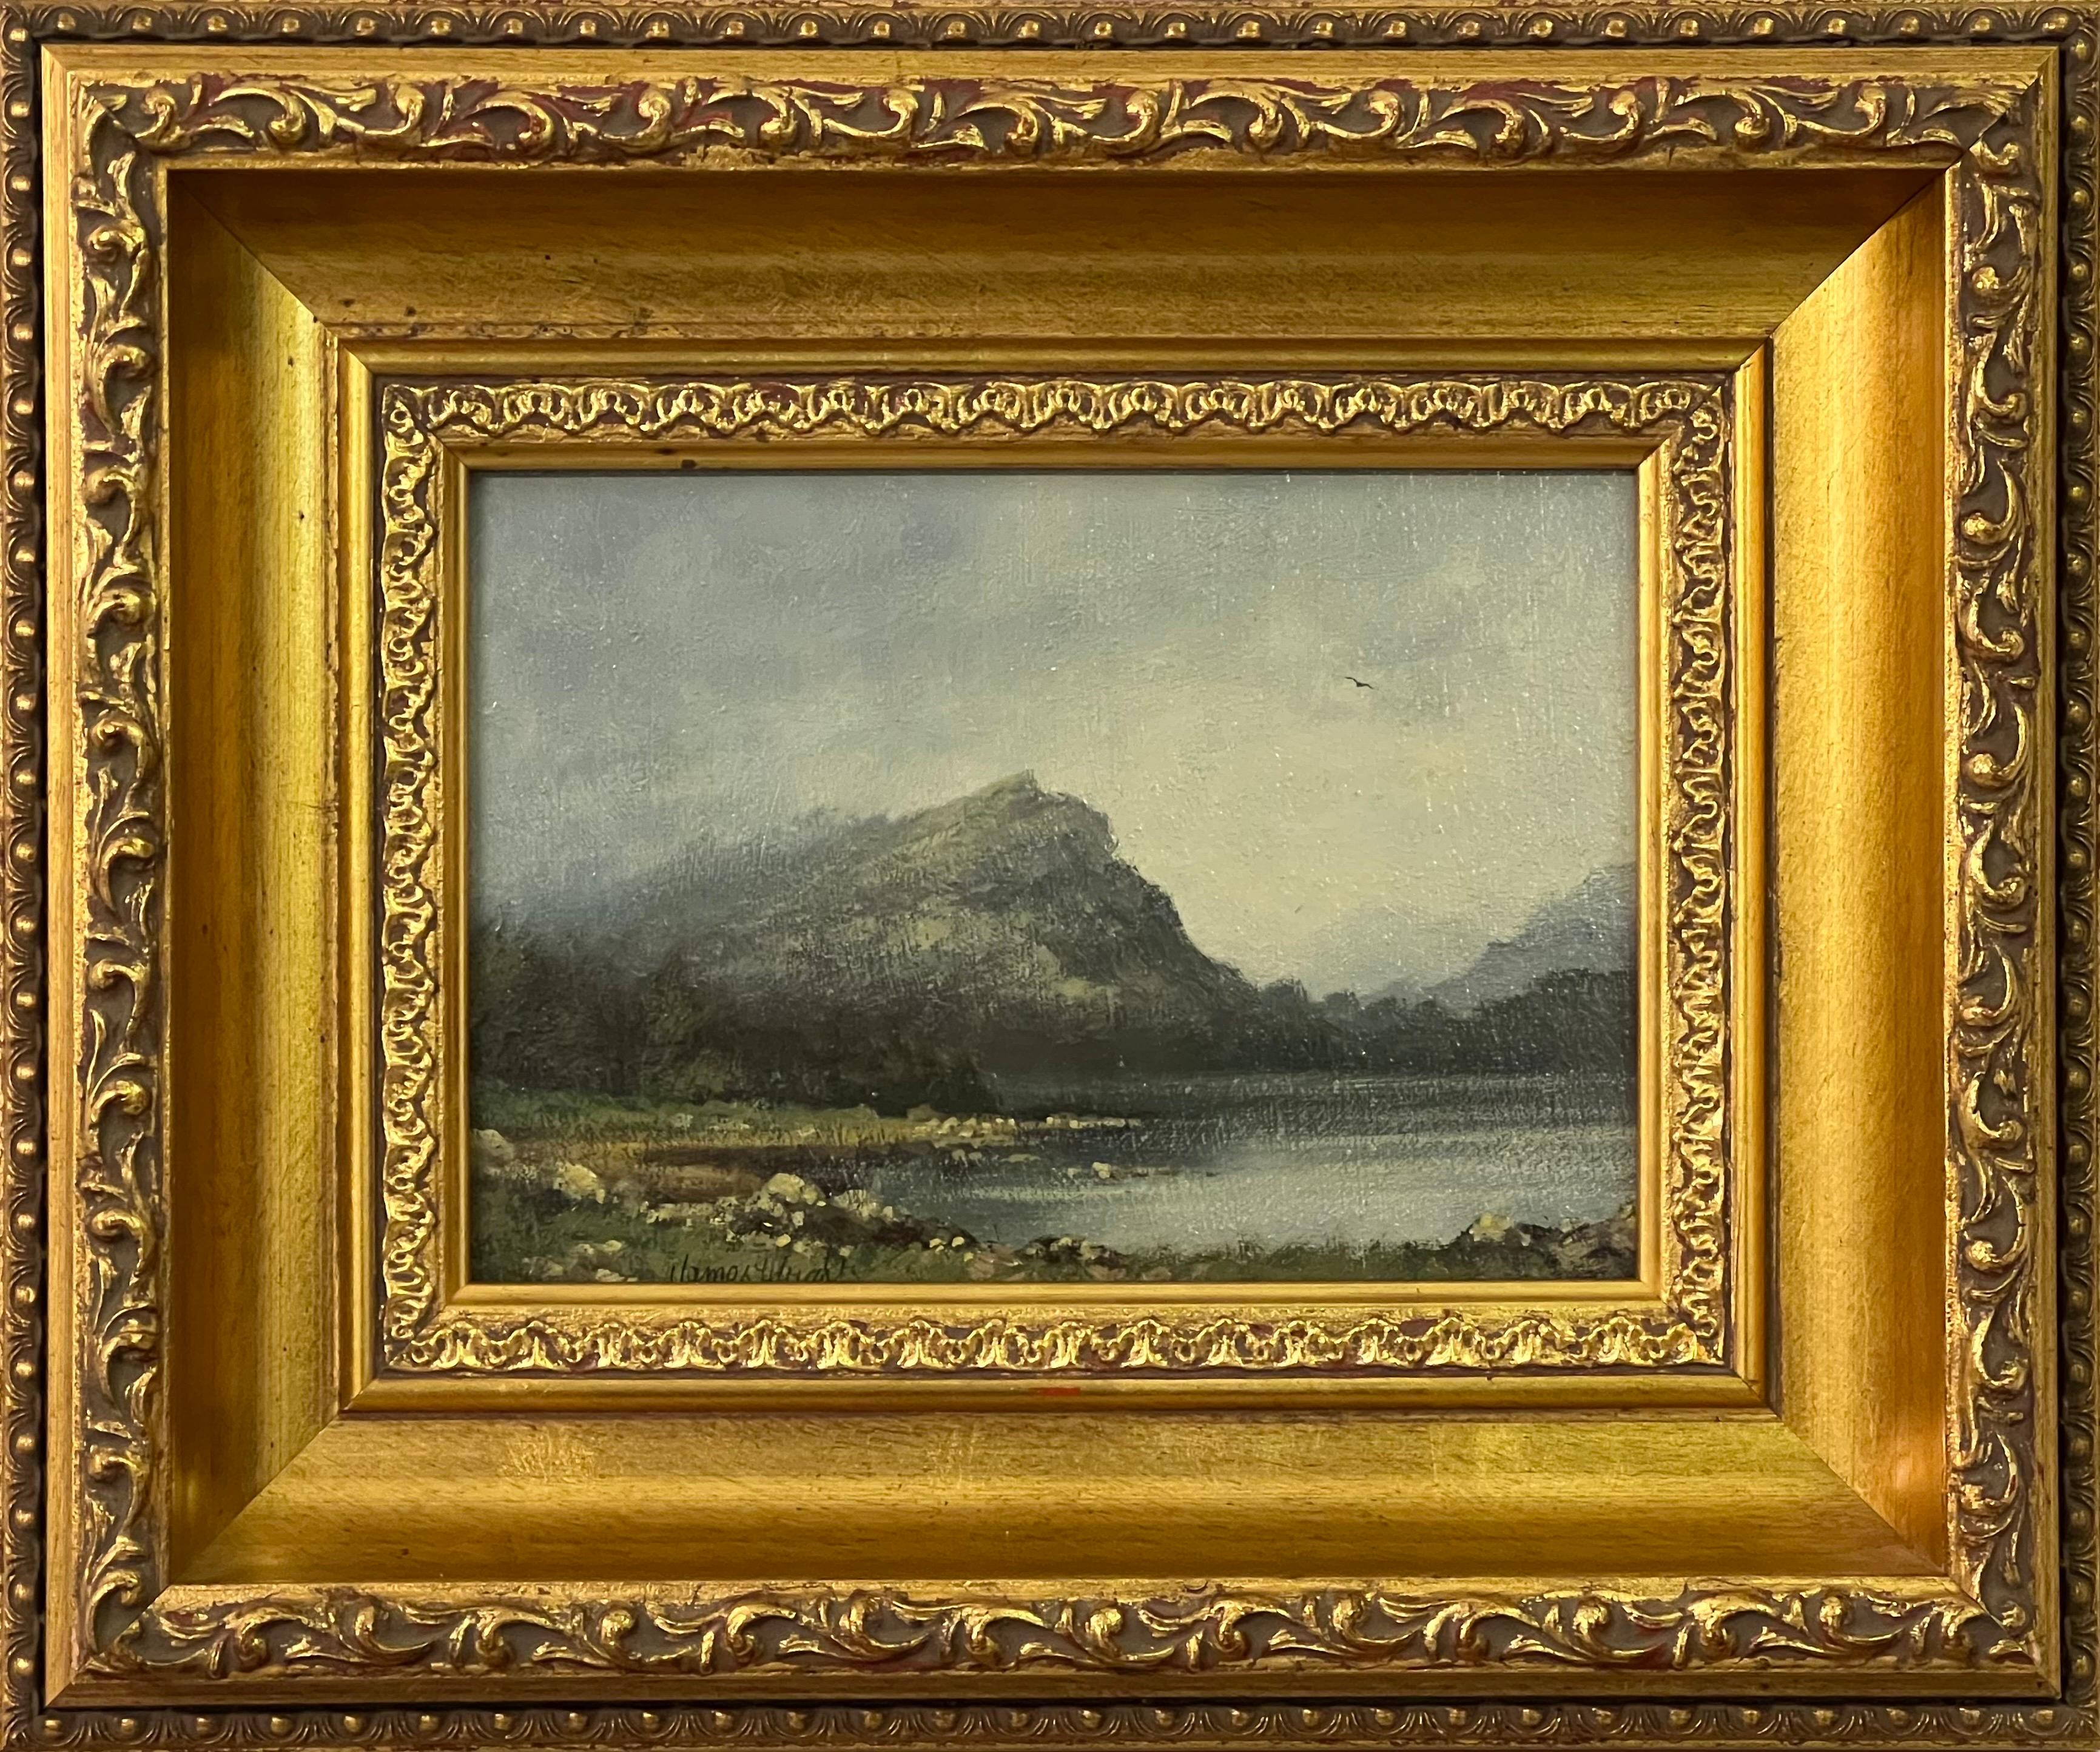 Painting of Lake & Mountains in England by 20th Century British Landscape Artist